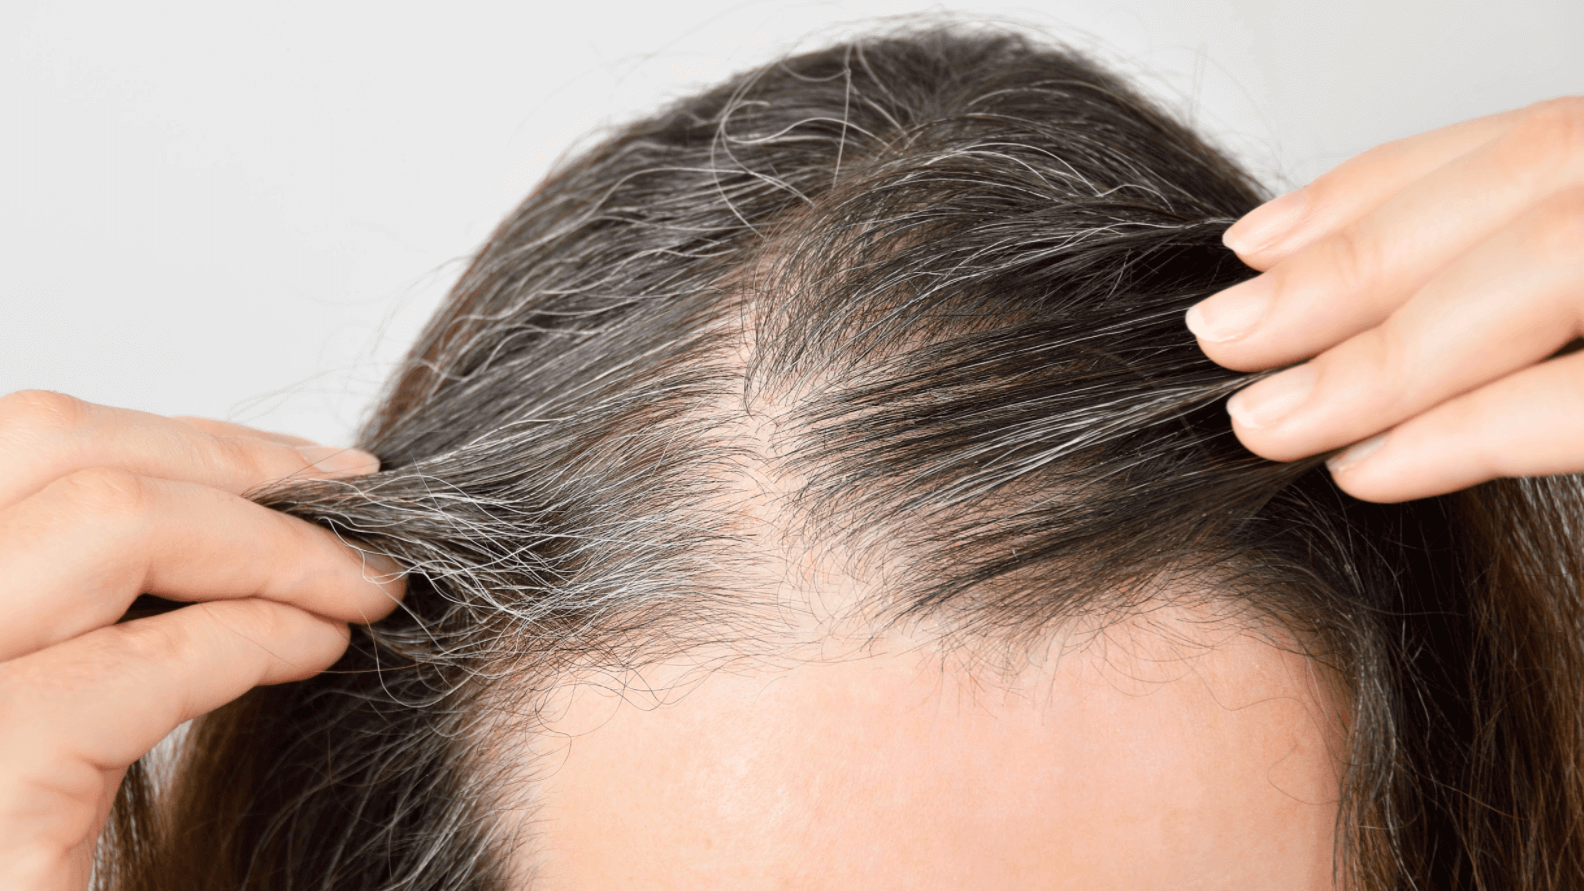 I Am Balding. Is the NeoGraft® Hair Transplant for Me?